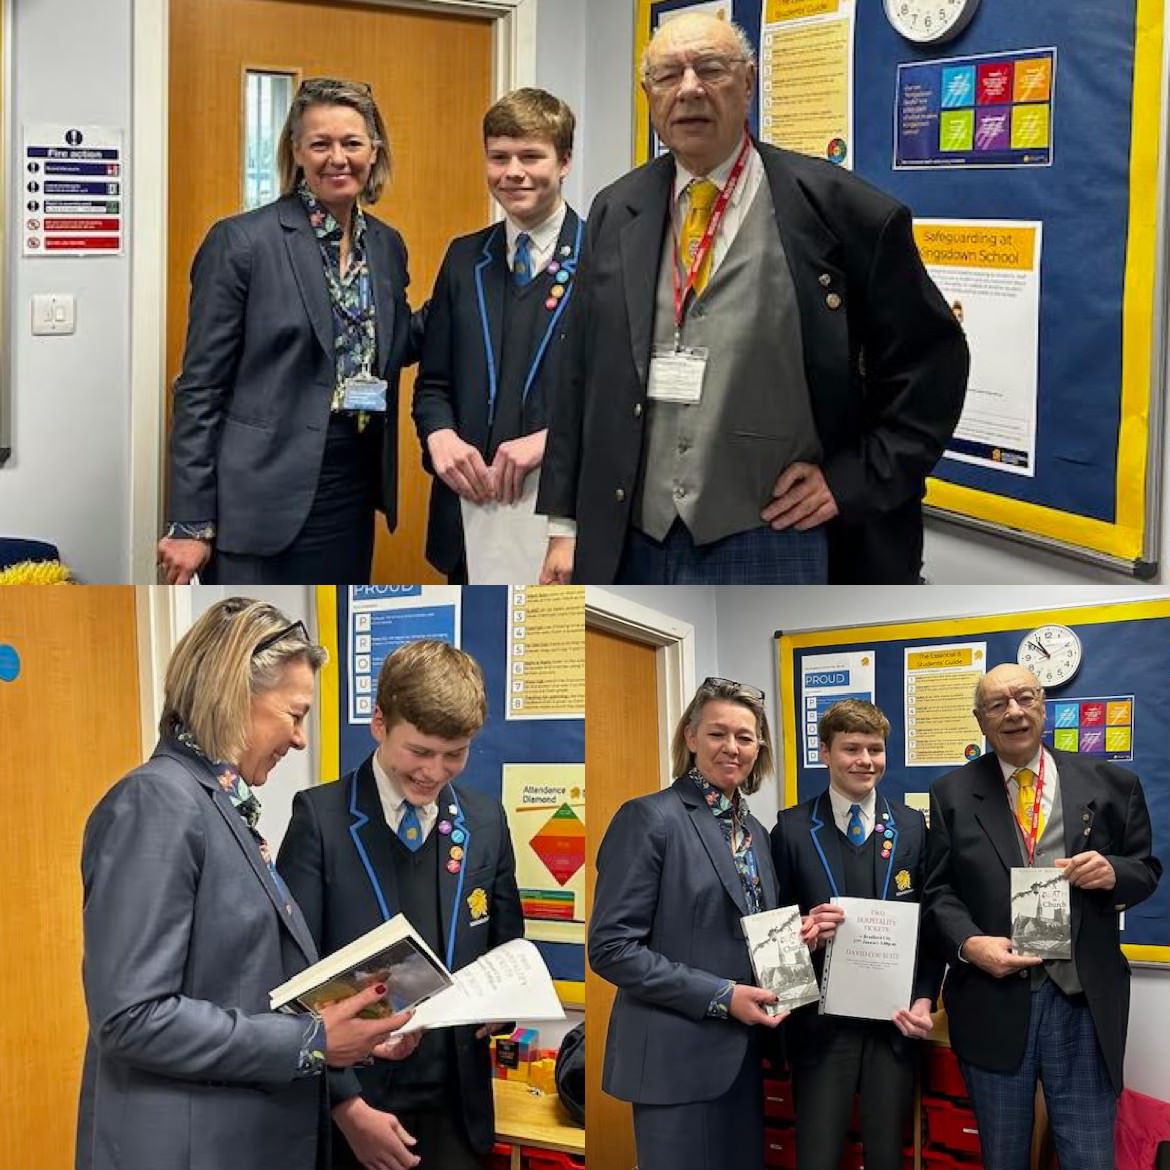 A #wonderful achievement for Alex who was selected for his photography skills to illustrate the cover of ‘A Death In Church’ by Dick Mattick. #KDSTeam